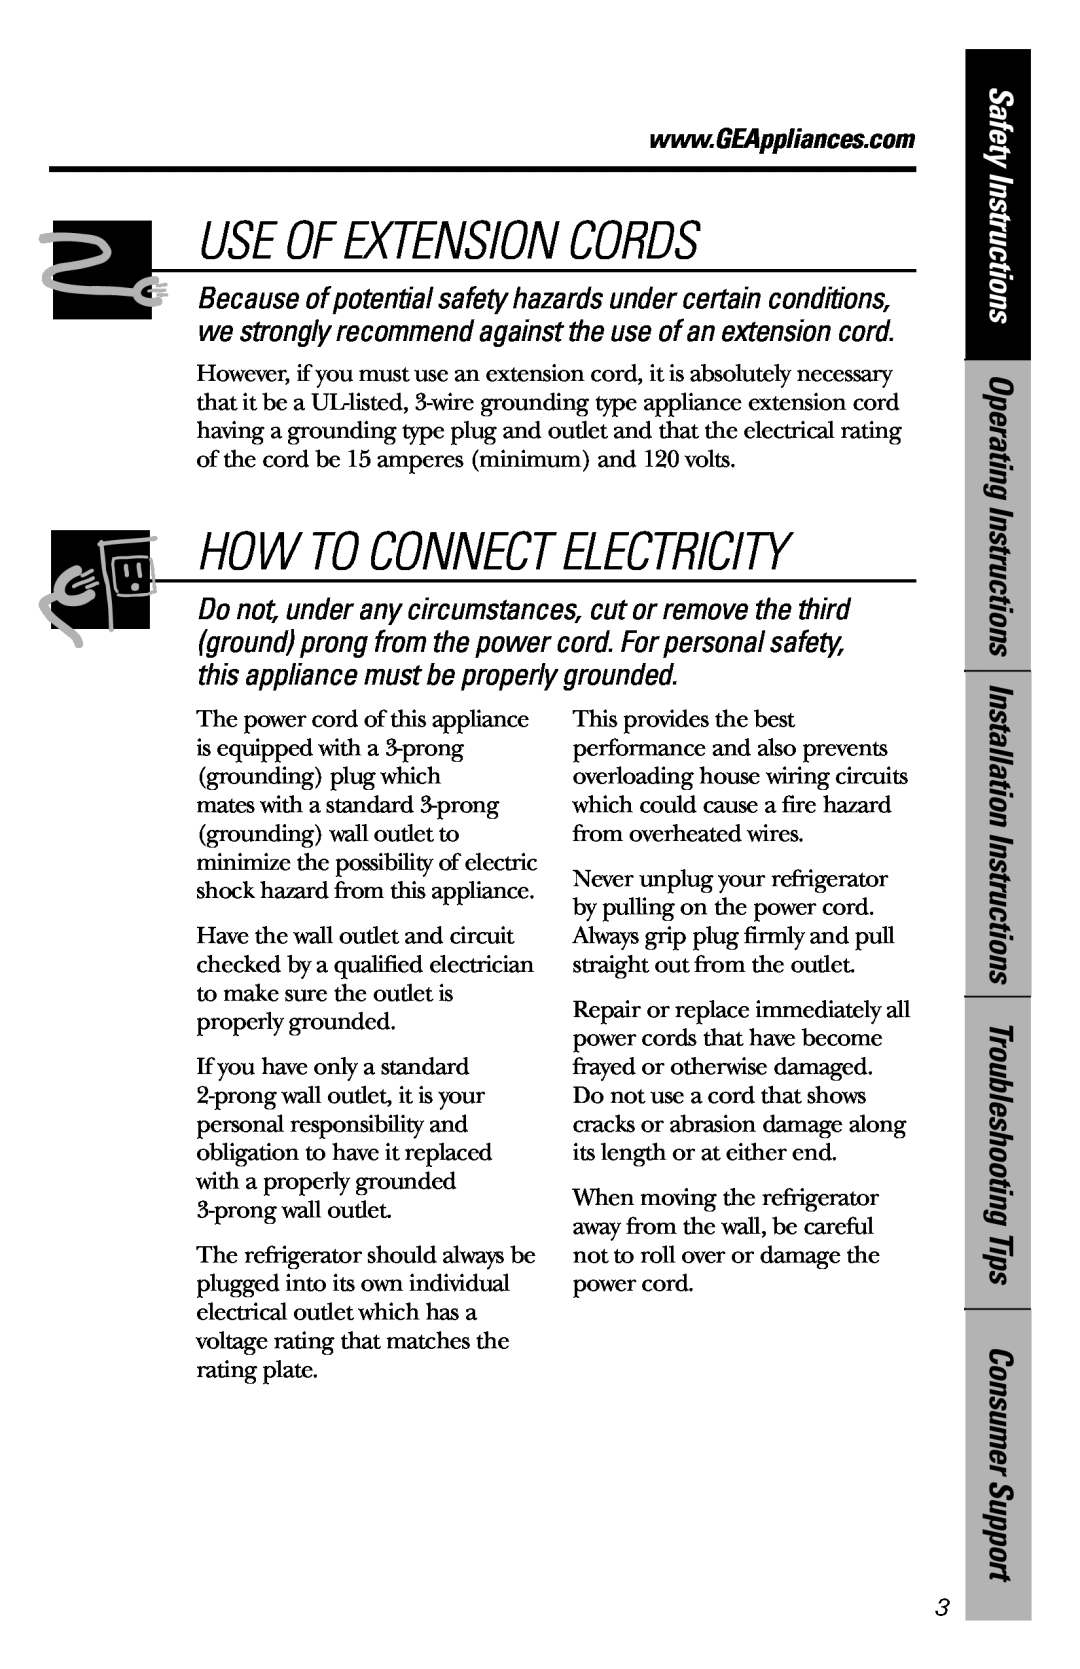 GE 4 Cubic Foot Models Use Of Extension Cords, Safety Instructions Operating Instructions, How To Connect Electricity 